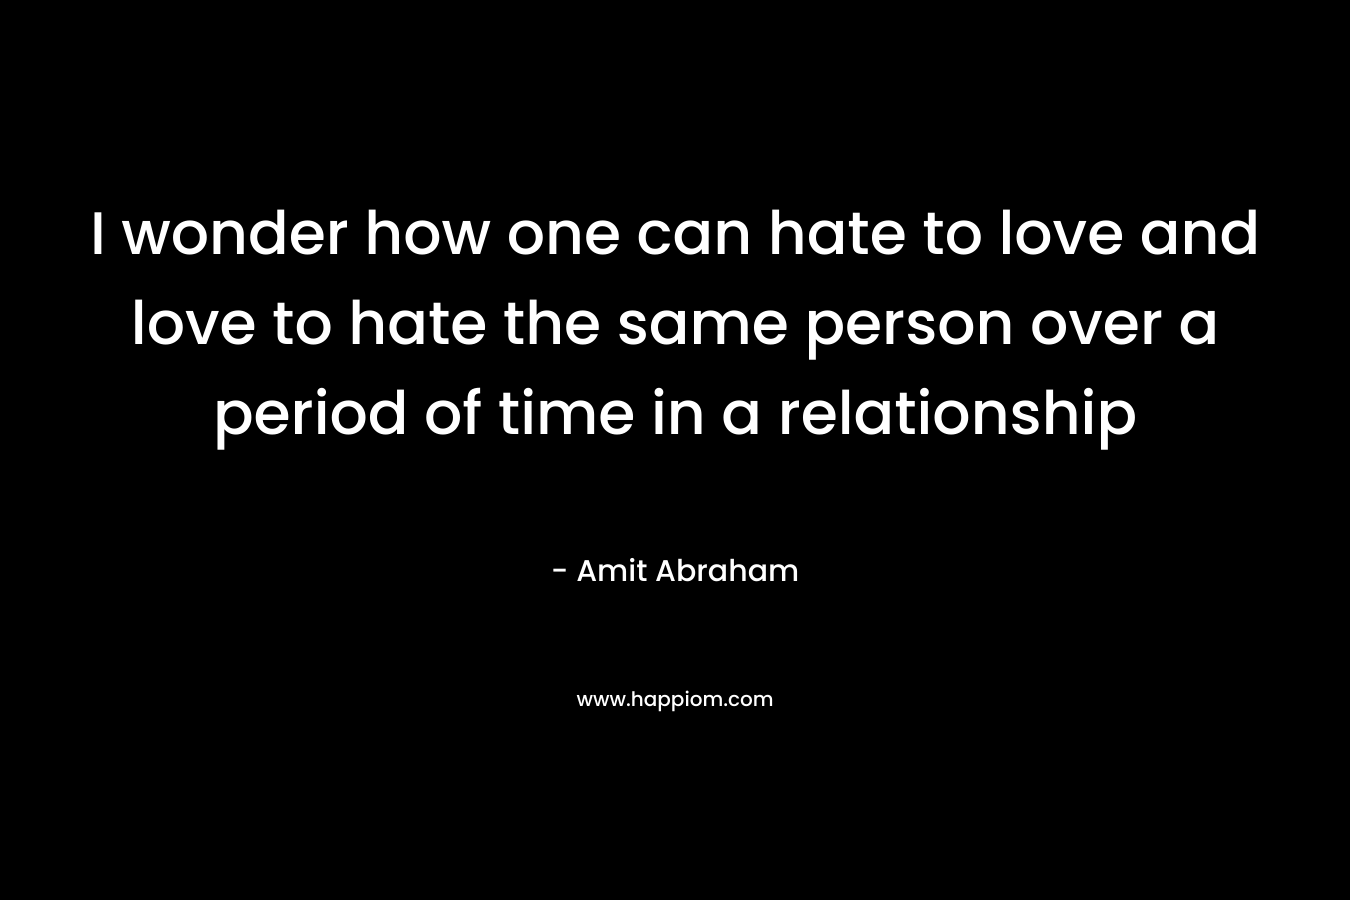 I wonder how one can hate to love and love to hate the same person over a period of time in a relationship